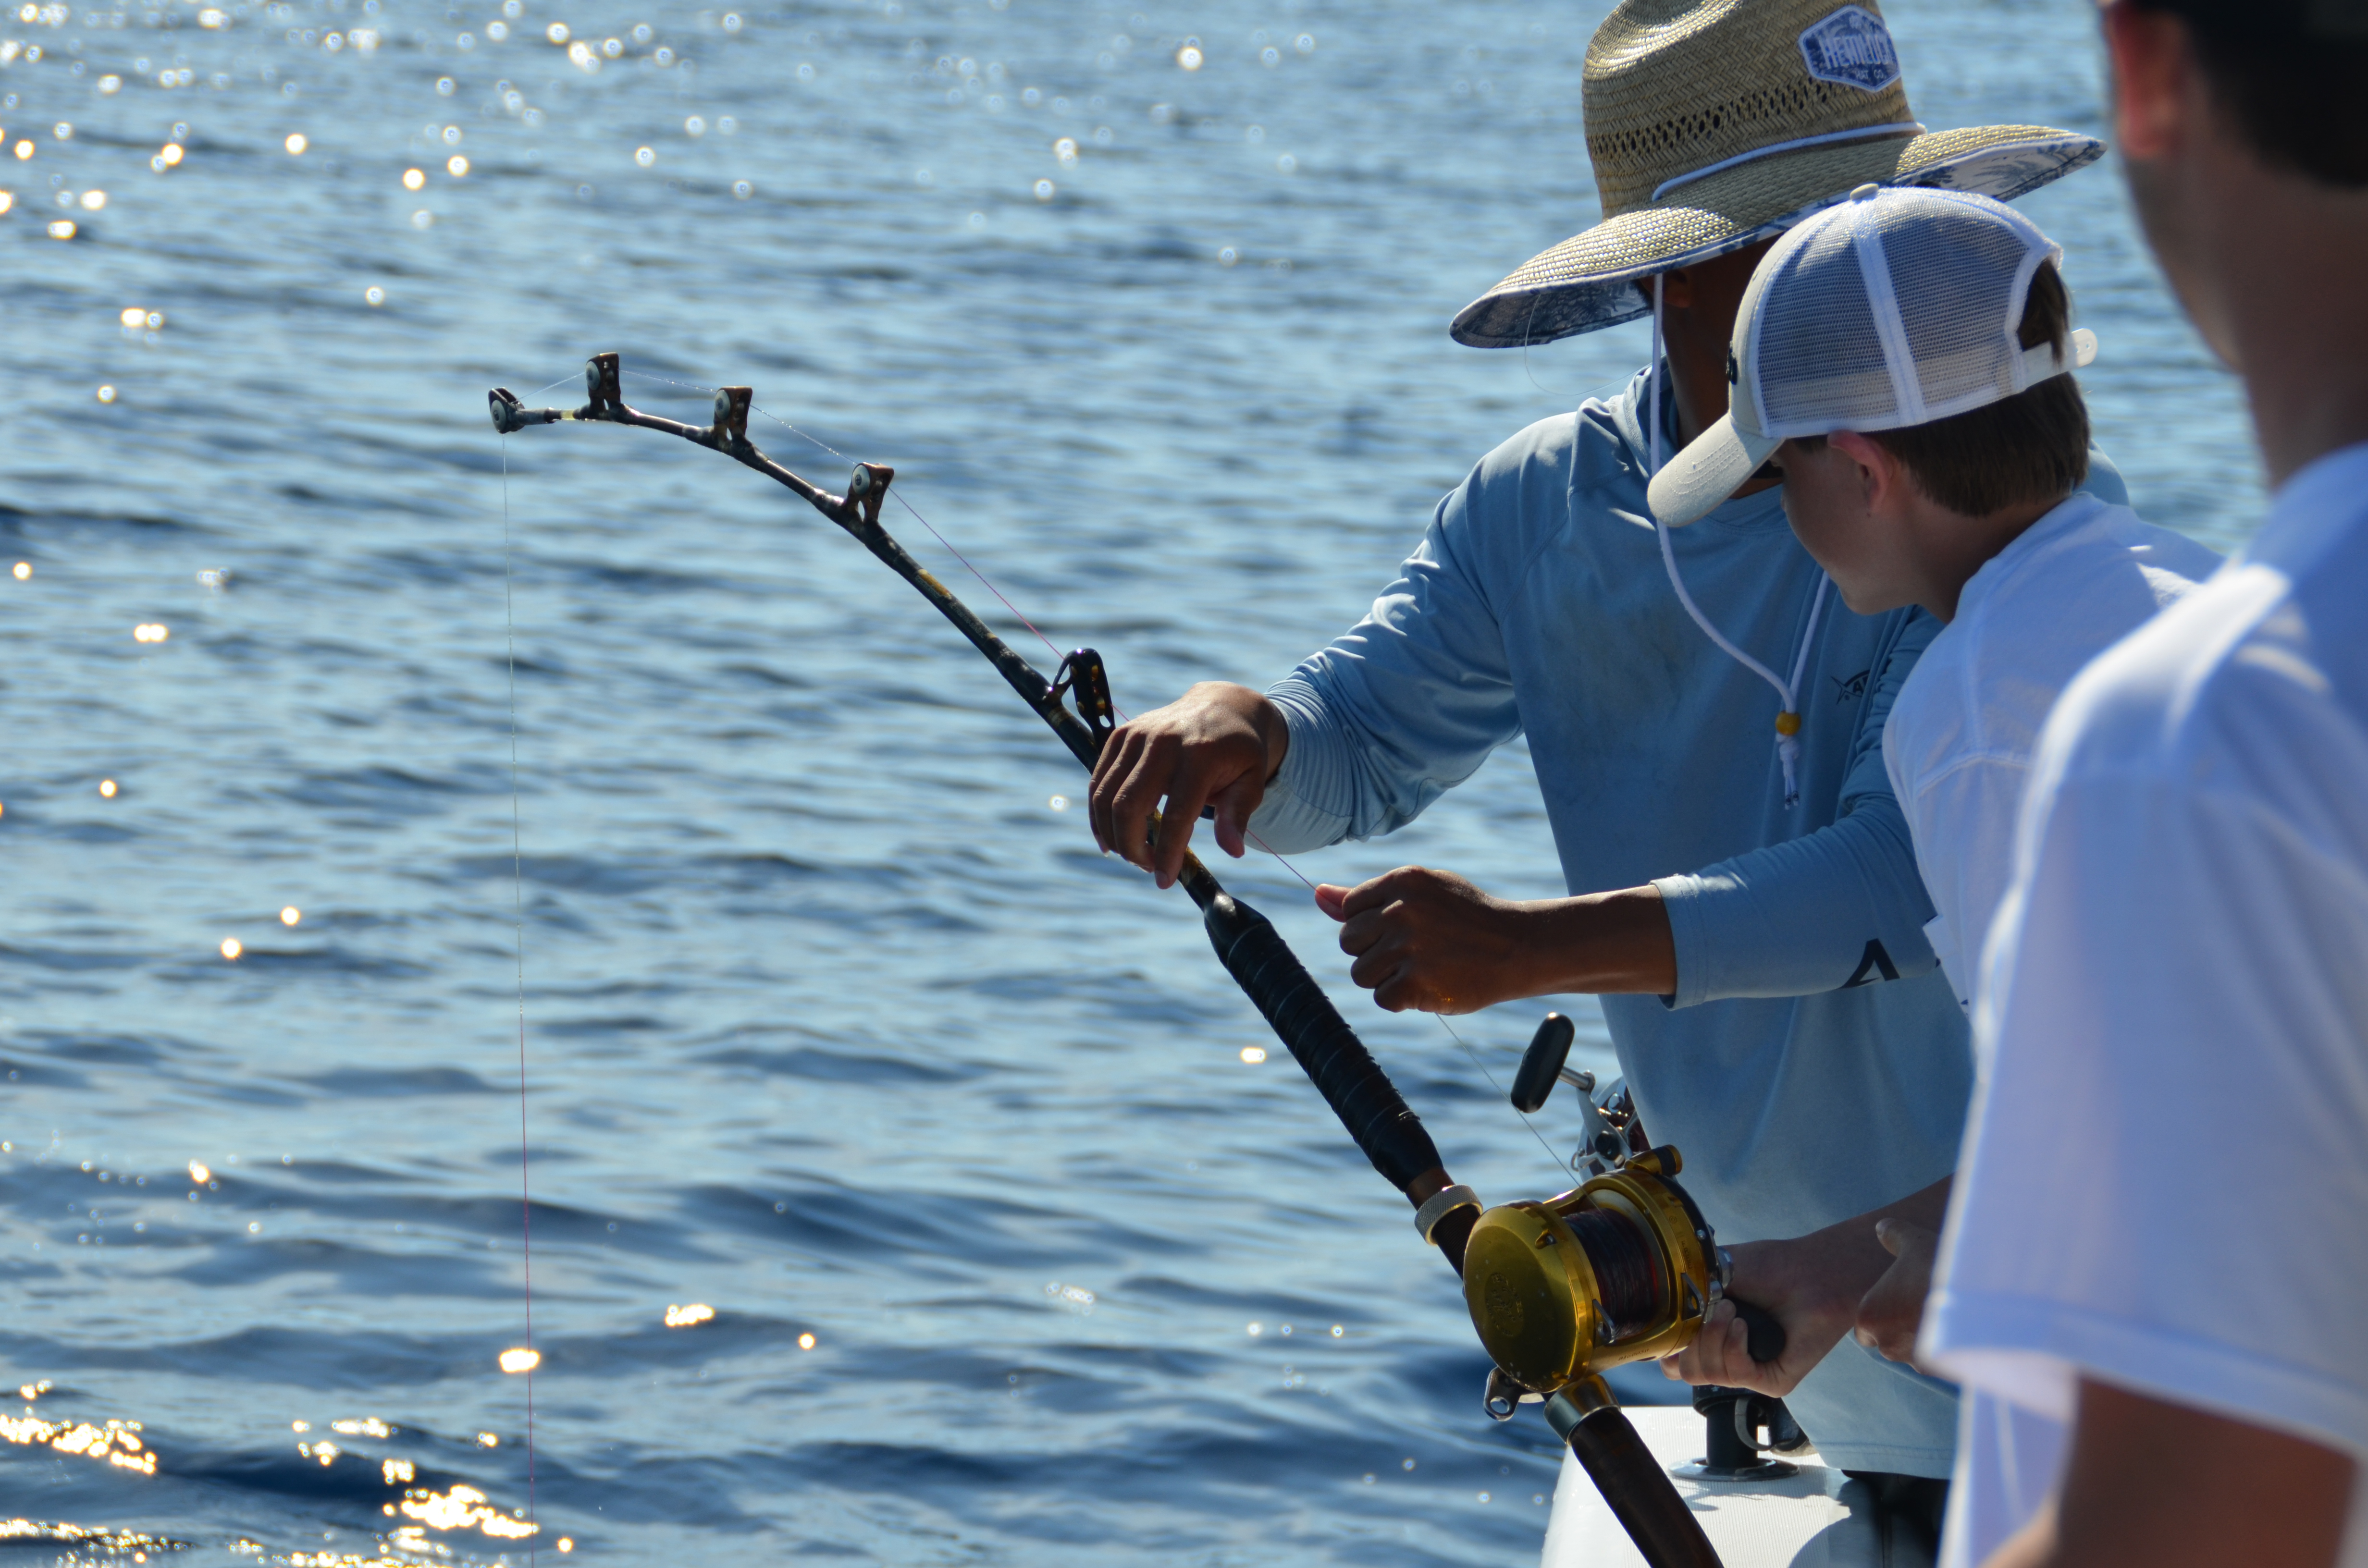 Return 'Em Right: Angling for Better Catch and Release in Gulf